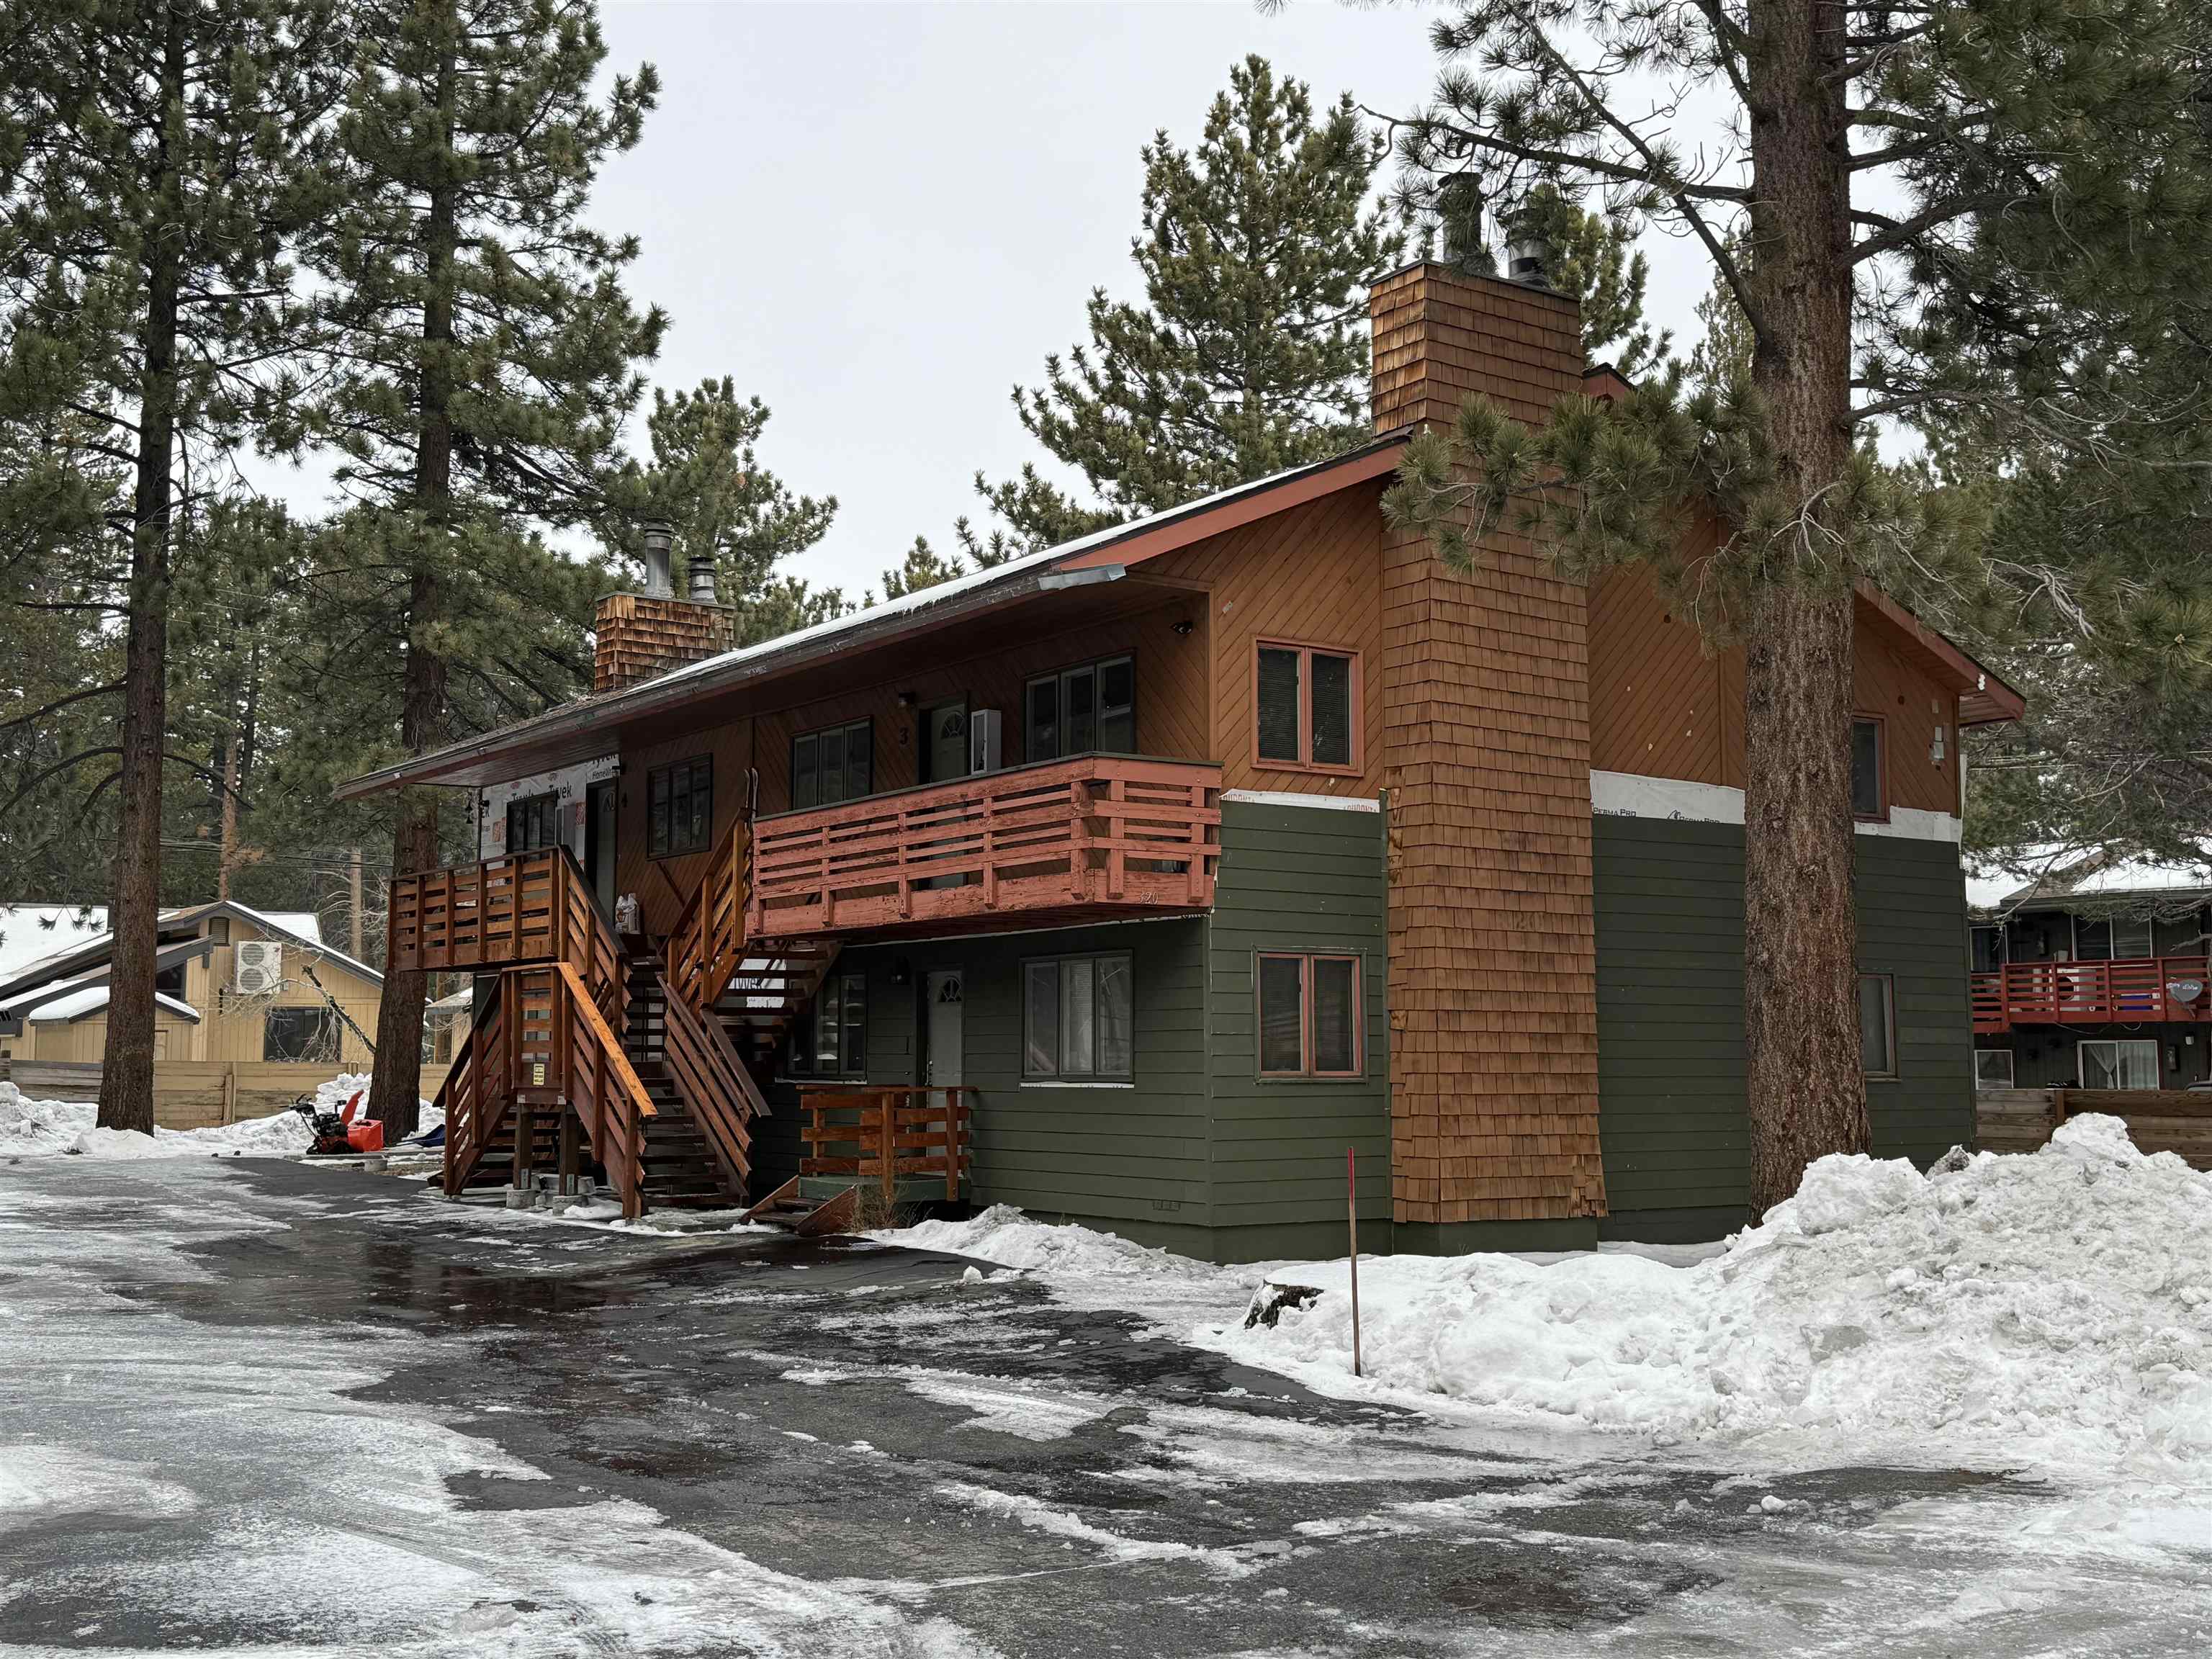 This is a clean, well maintained, fourplex in the heart of Mammoth.   Ideal for tenants looking to walk to school, public transportation, work, or just local amenities like restaurants and shopping.   New siding is currently being installed to the entire building by the seller.  If not complete before close of escrow, a credit can be negotiated.   Water heaters are all new, roof on the north side is 2 years old with southern half being installed.  Owner lives in one of the units and takes pride in ownership and has been very selective about tenants.  The owner has historically offered tenants attractive rates to reduce turnover, thus rents are below market.  Competing rents are closer to $2,200 per month. Owner occupies one of the units. There are 8 open parking spaces and a common areas laundry room with storage lockers.  All units are effectively the same floor plan.